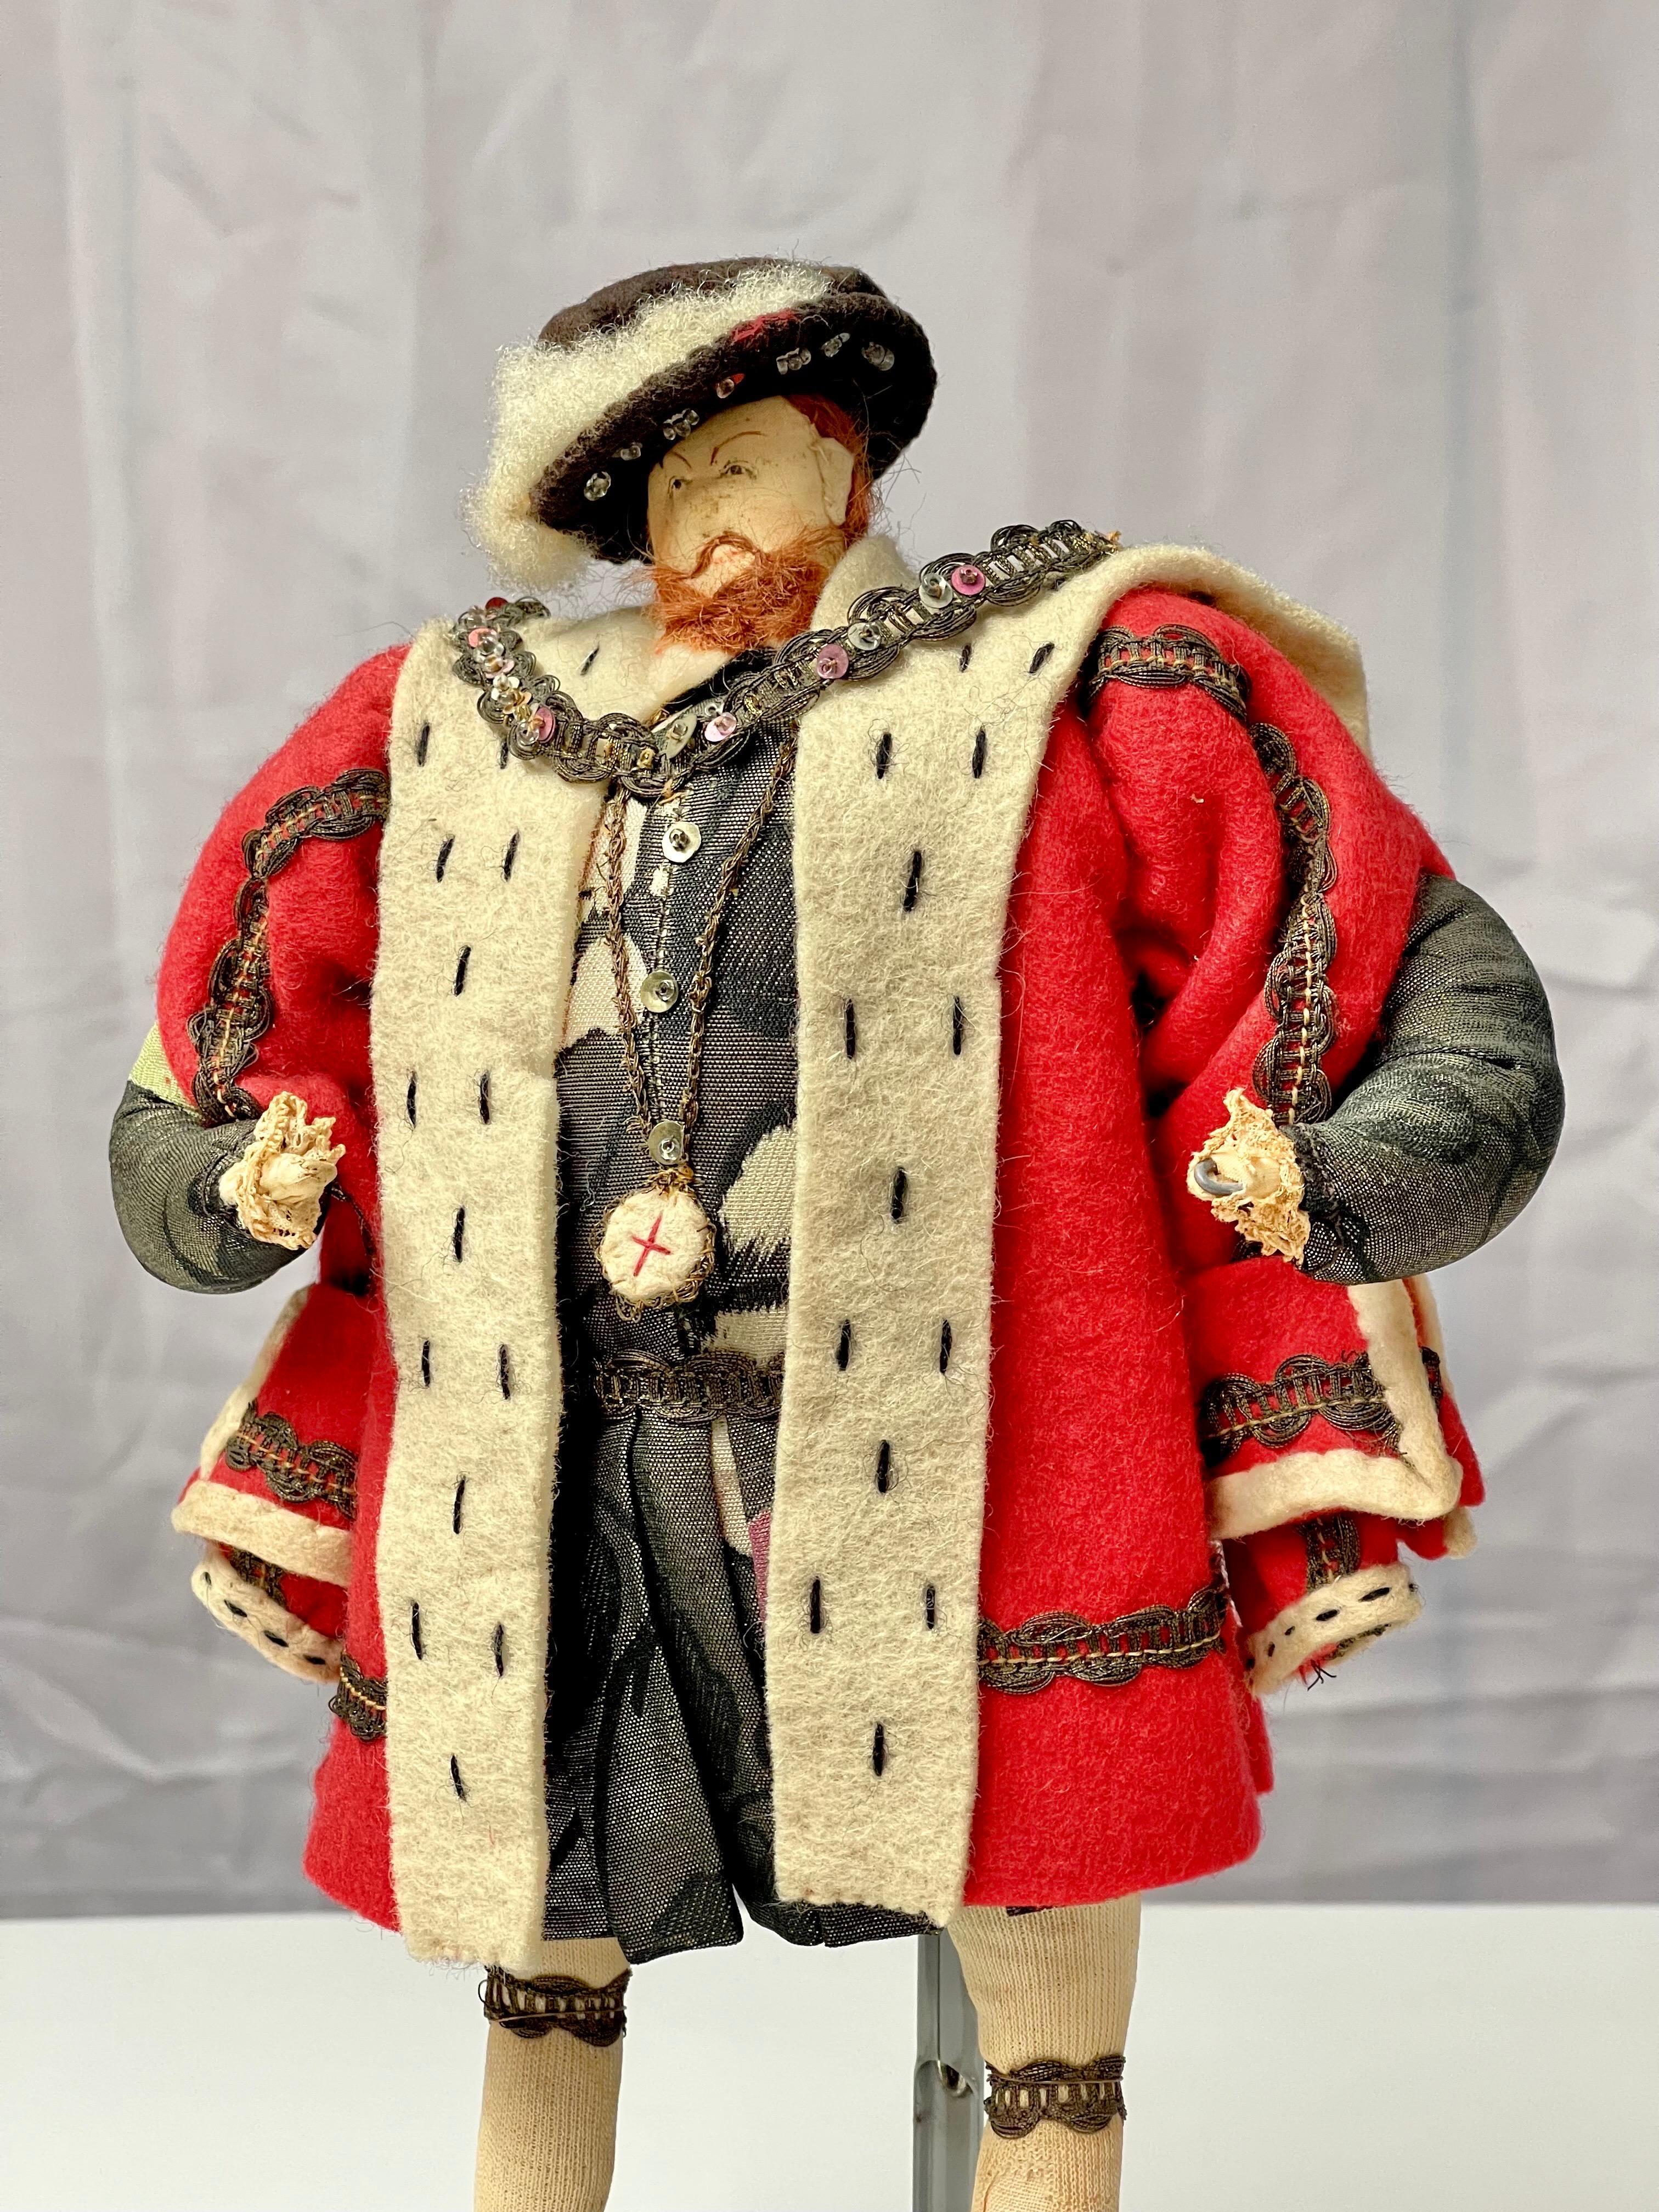 henry the doll